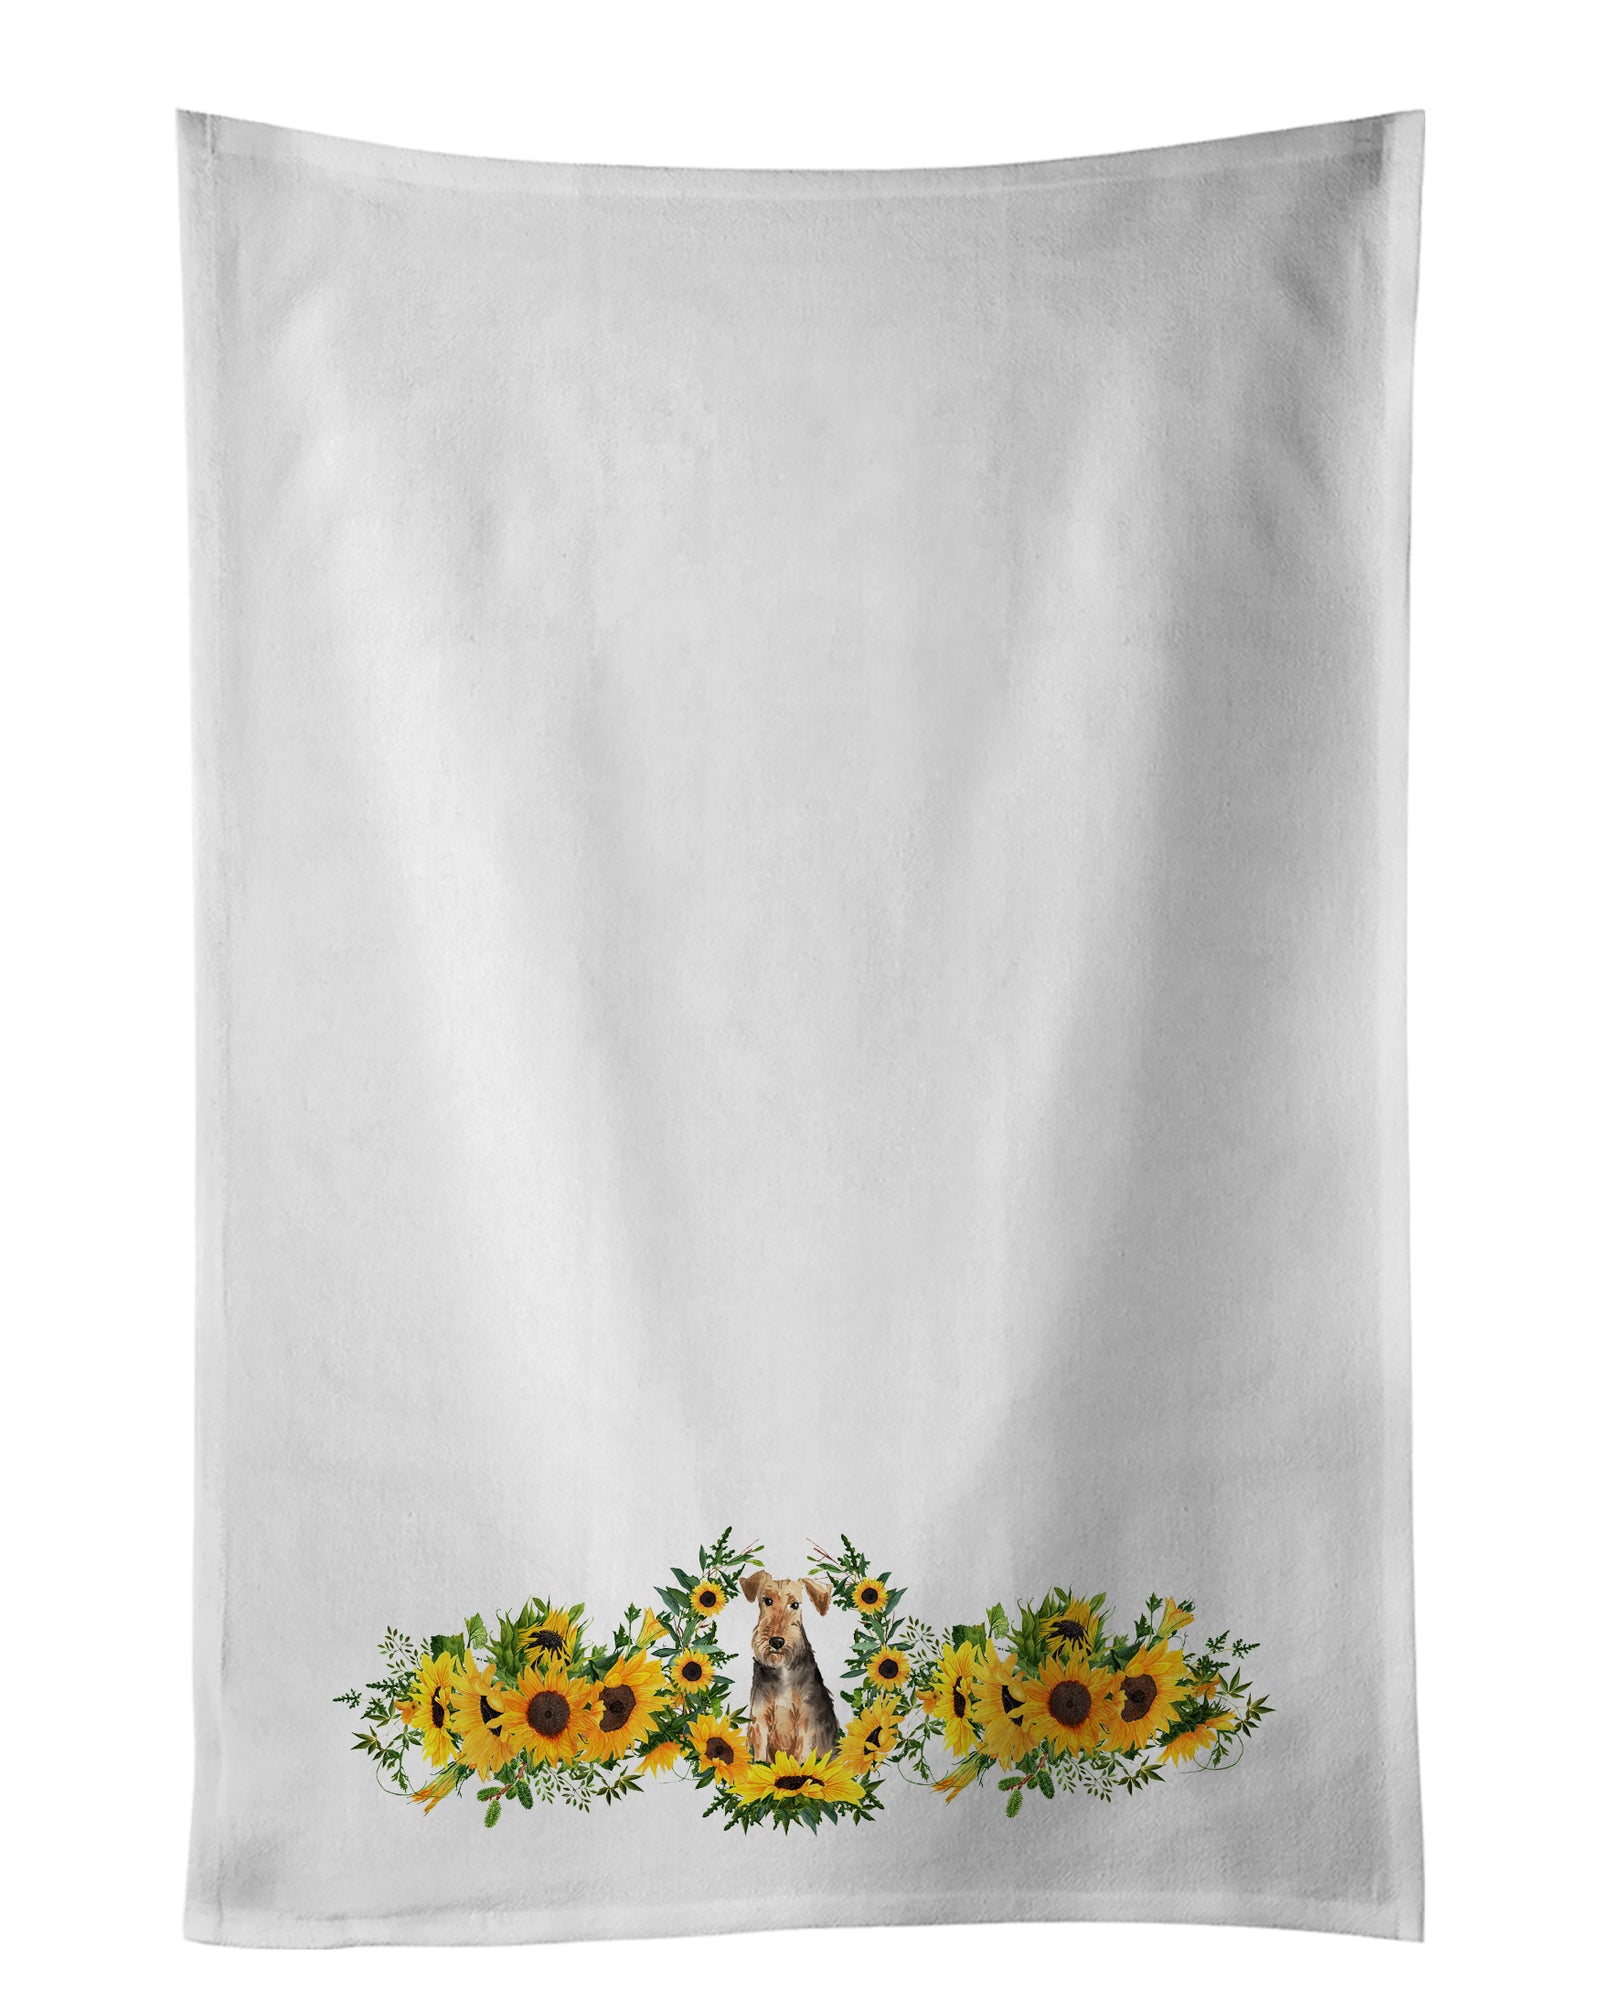 Buy this Airedale Terrier in Sunflowers White Kitchen Towel Set of 2